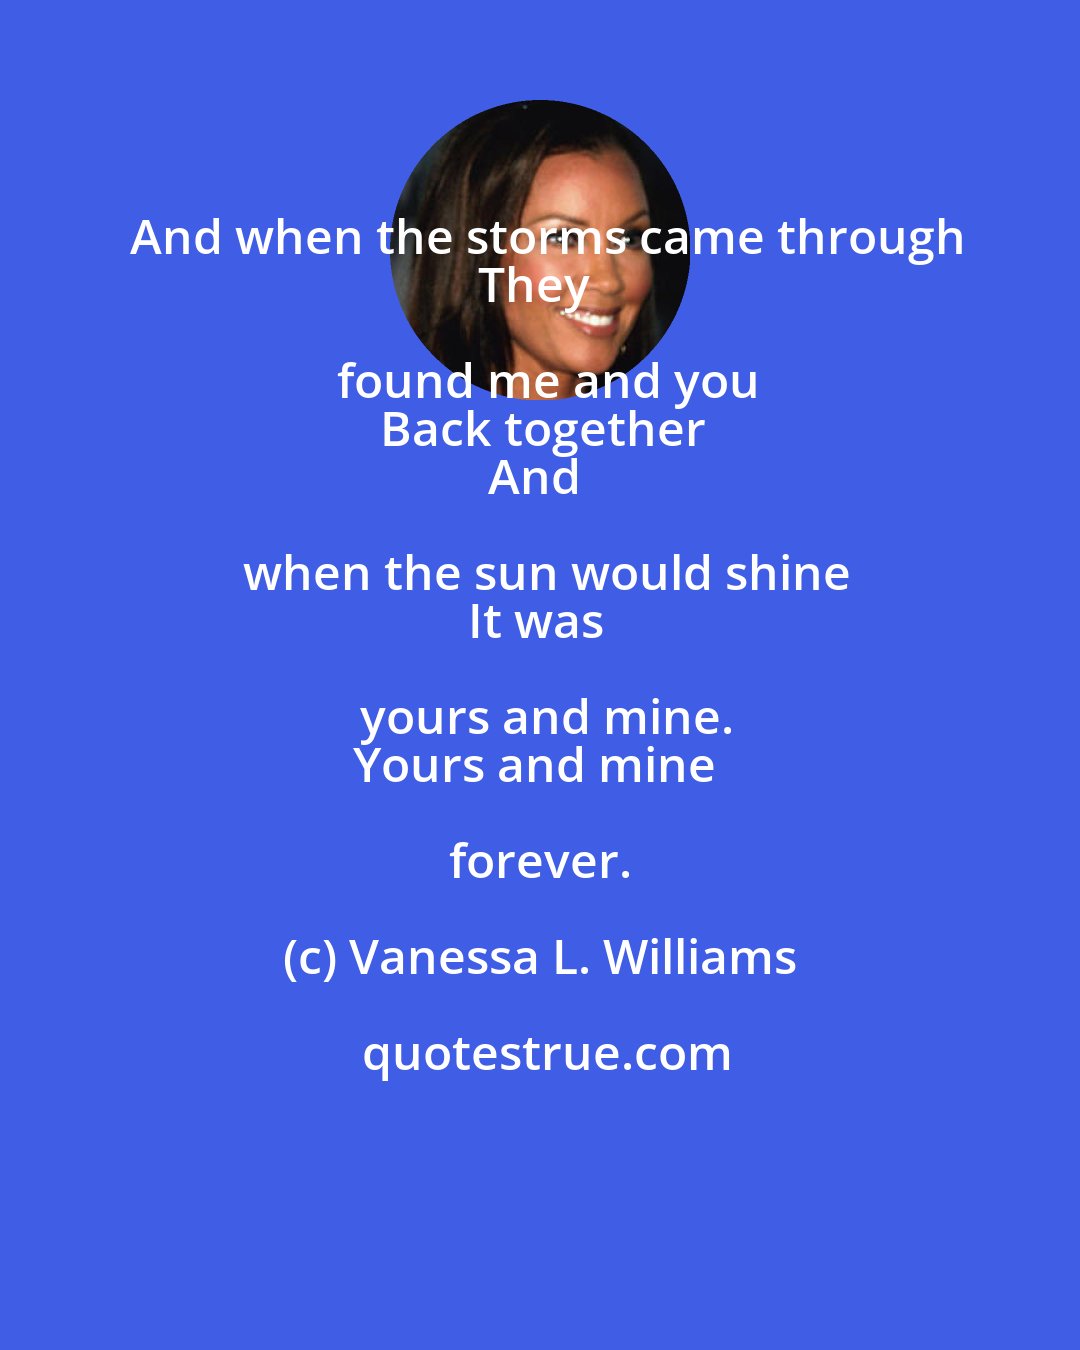 Vanessa L. Williams: And when the storms came through
They found me and you
Back together
And when the sun would shine
It was yours and mine.
Yours and mine forever.